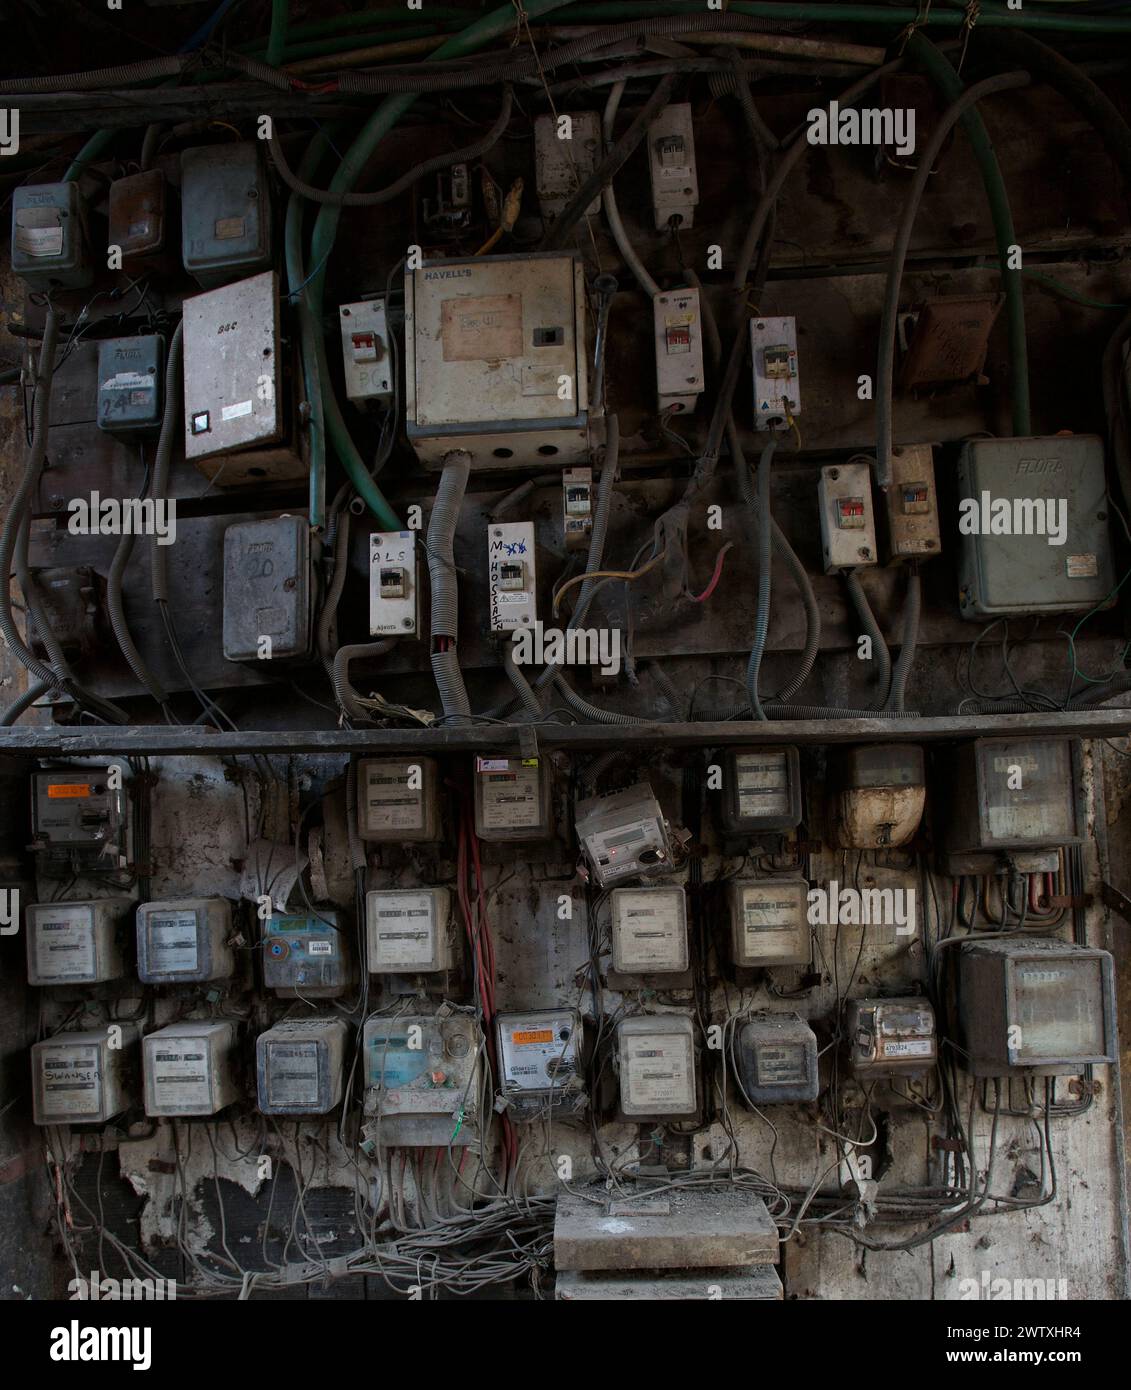 Electricity meters on the wall of an entrance of a building,Kolkata, India Stock Photo